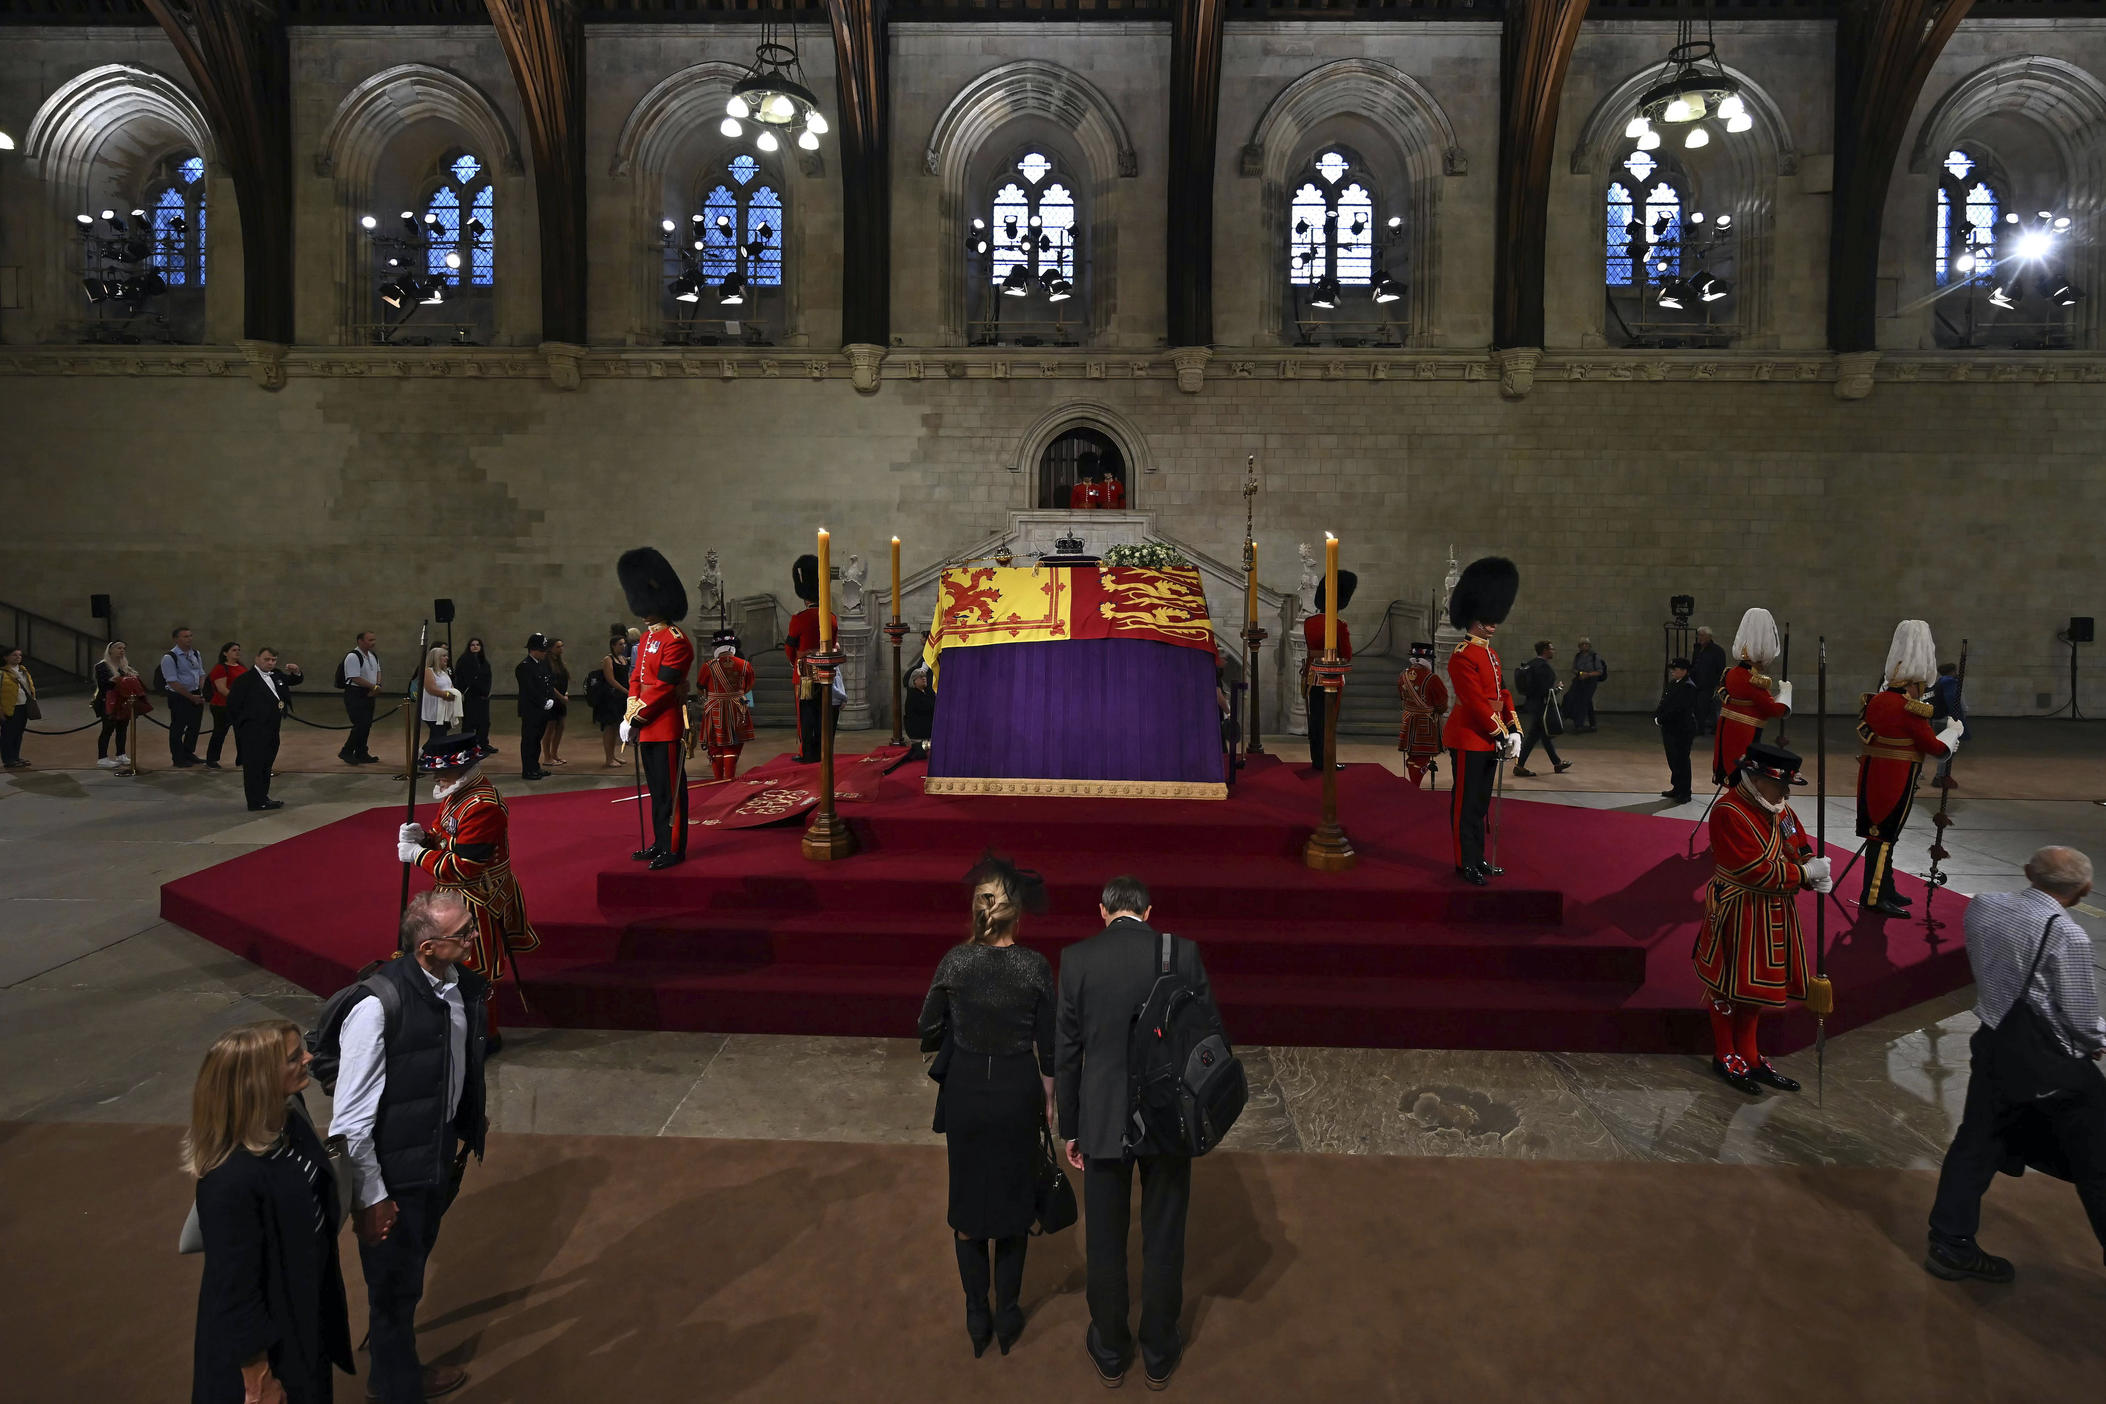 Members of the public file past the coffin of Queen Elizabeth II inside Westminster Hall in London on Wednesday.